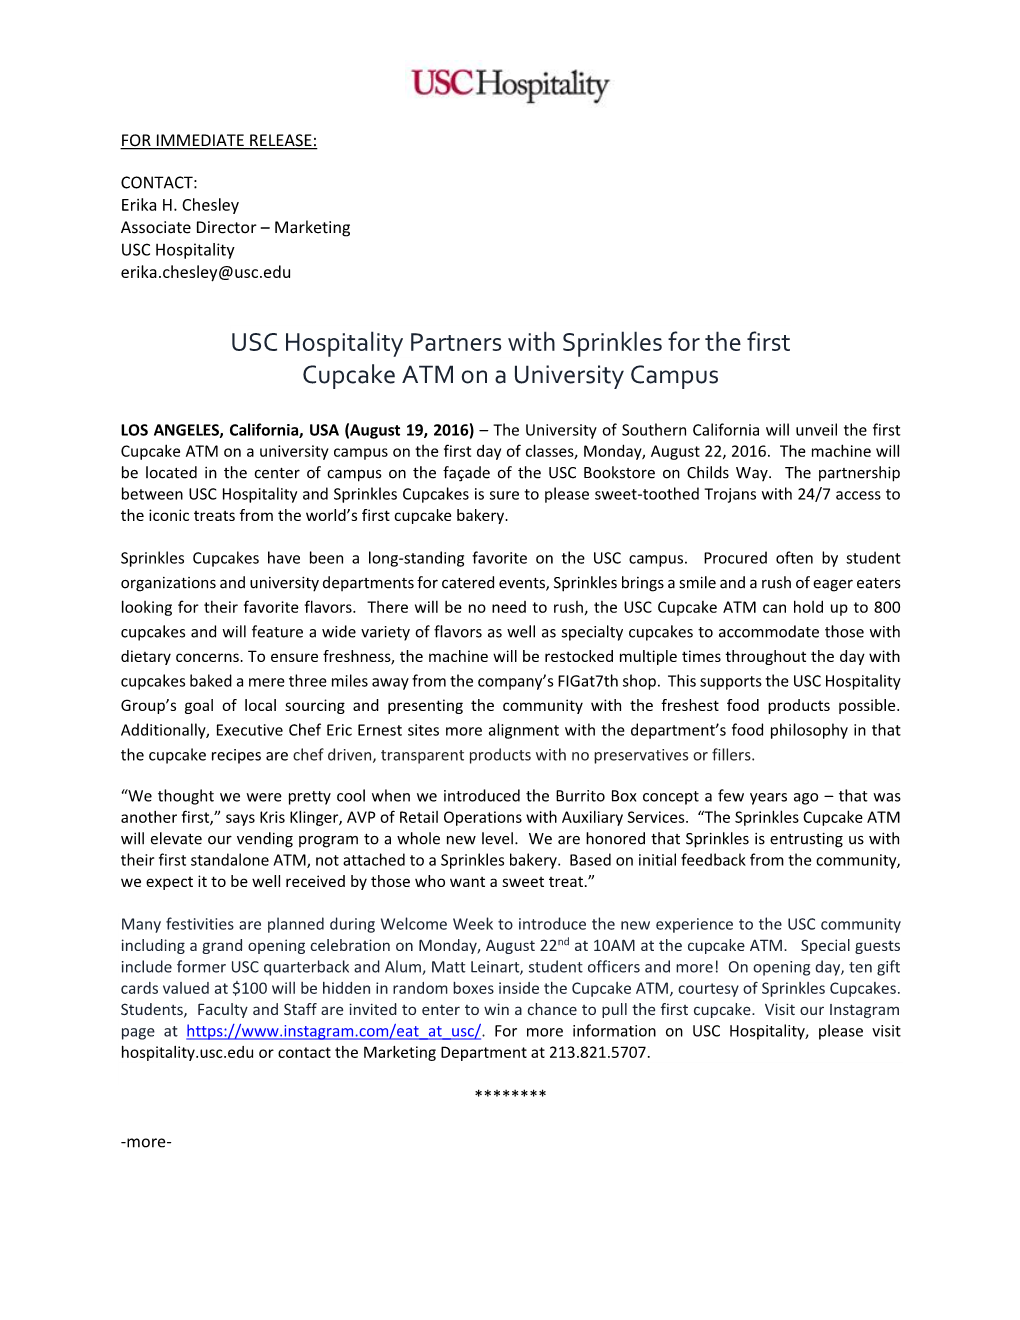 USC Hospitality Partners with Sprinkles for the First Cupcake ATM on a University Campus